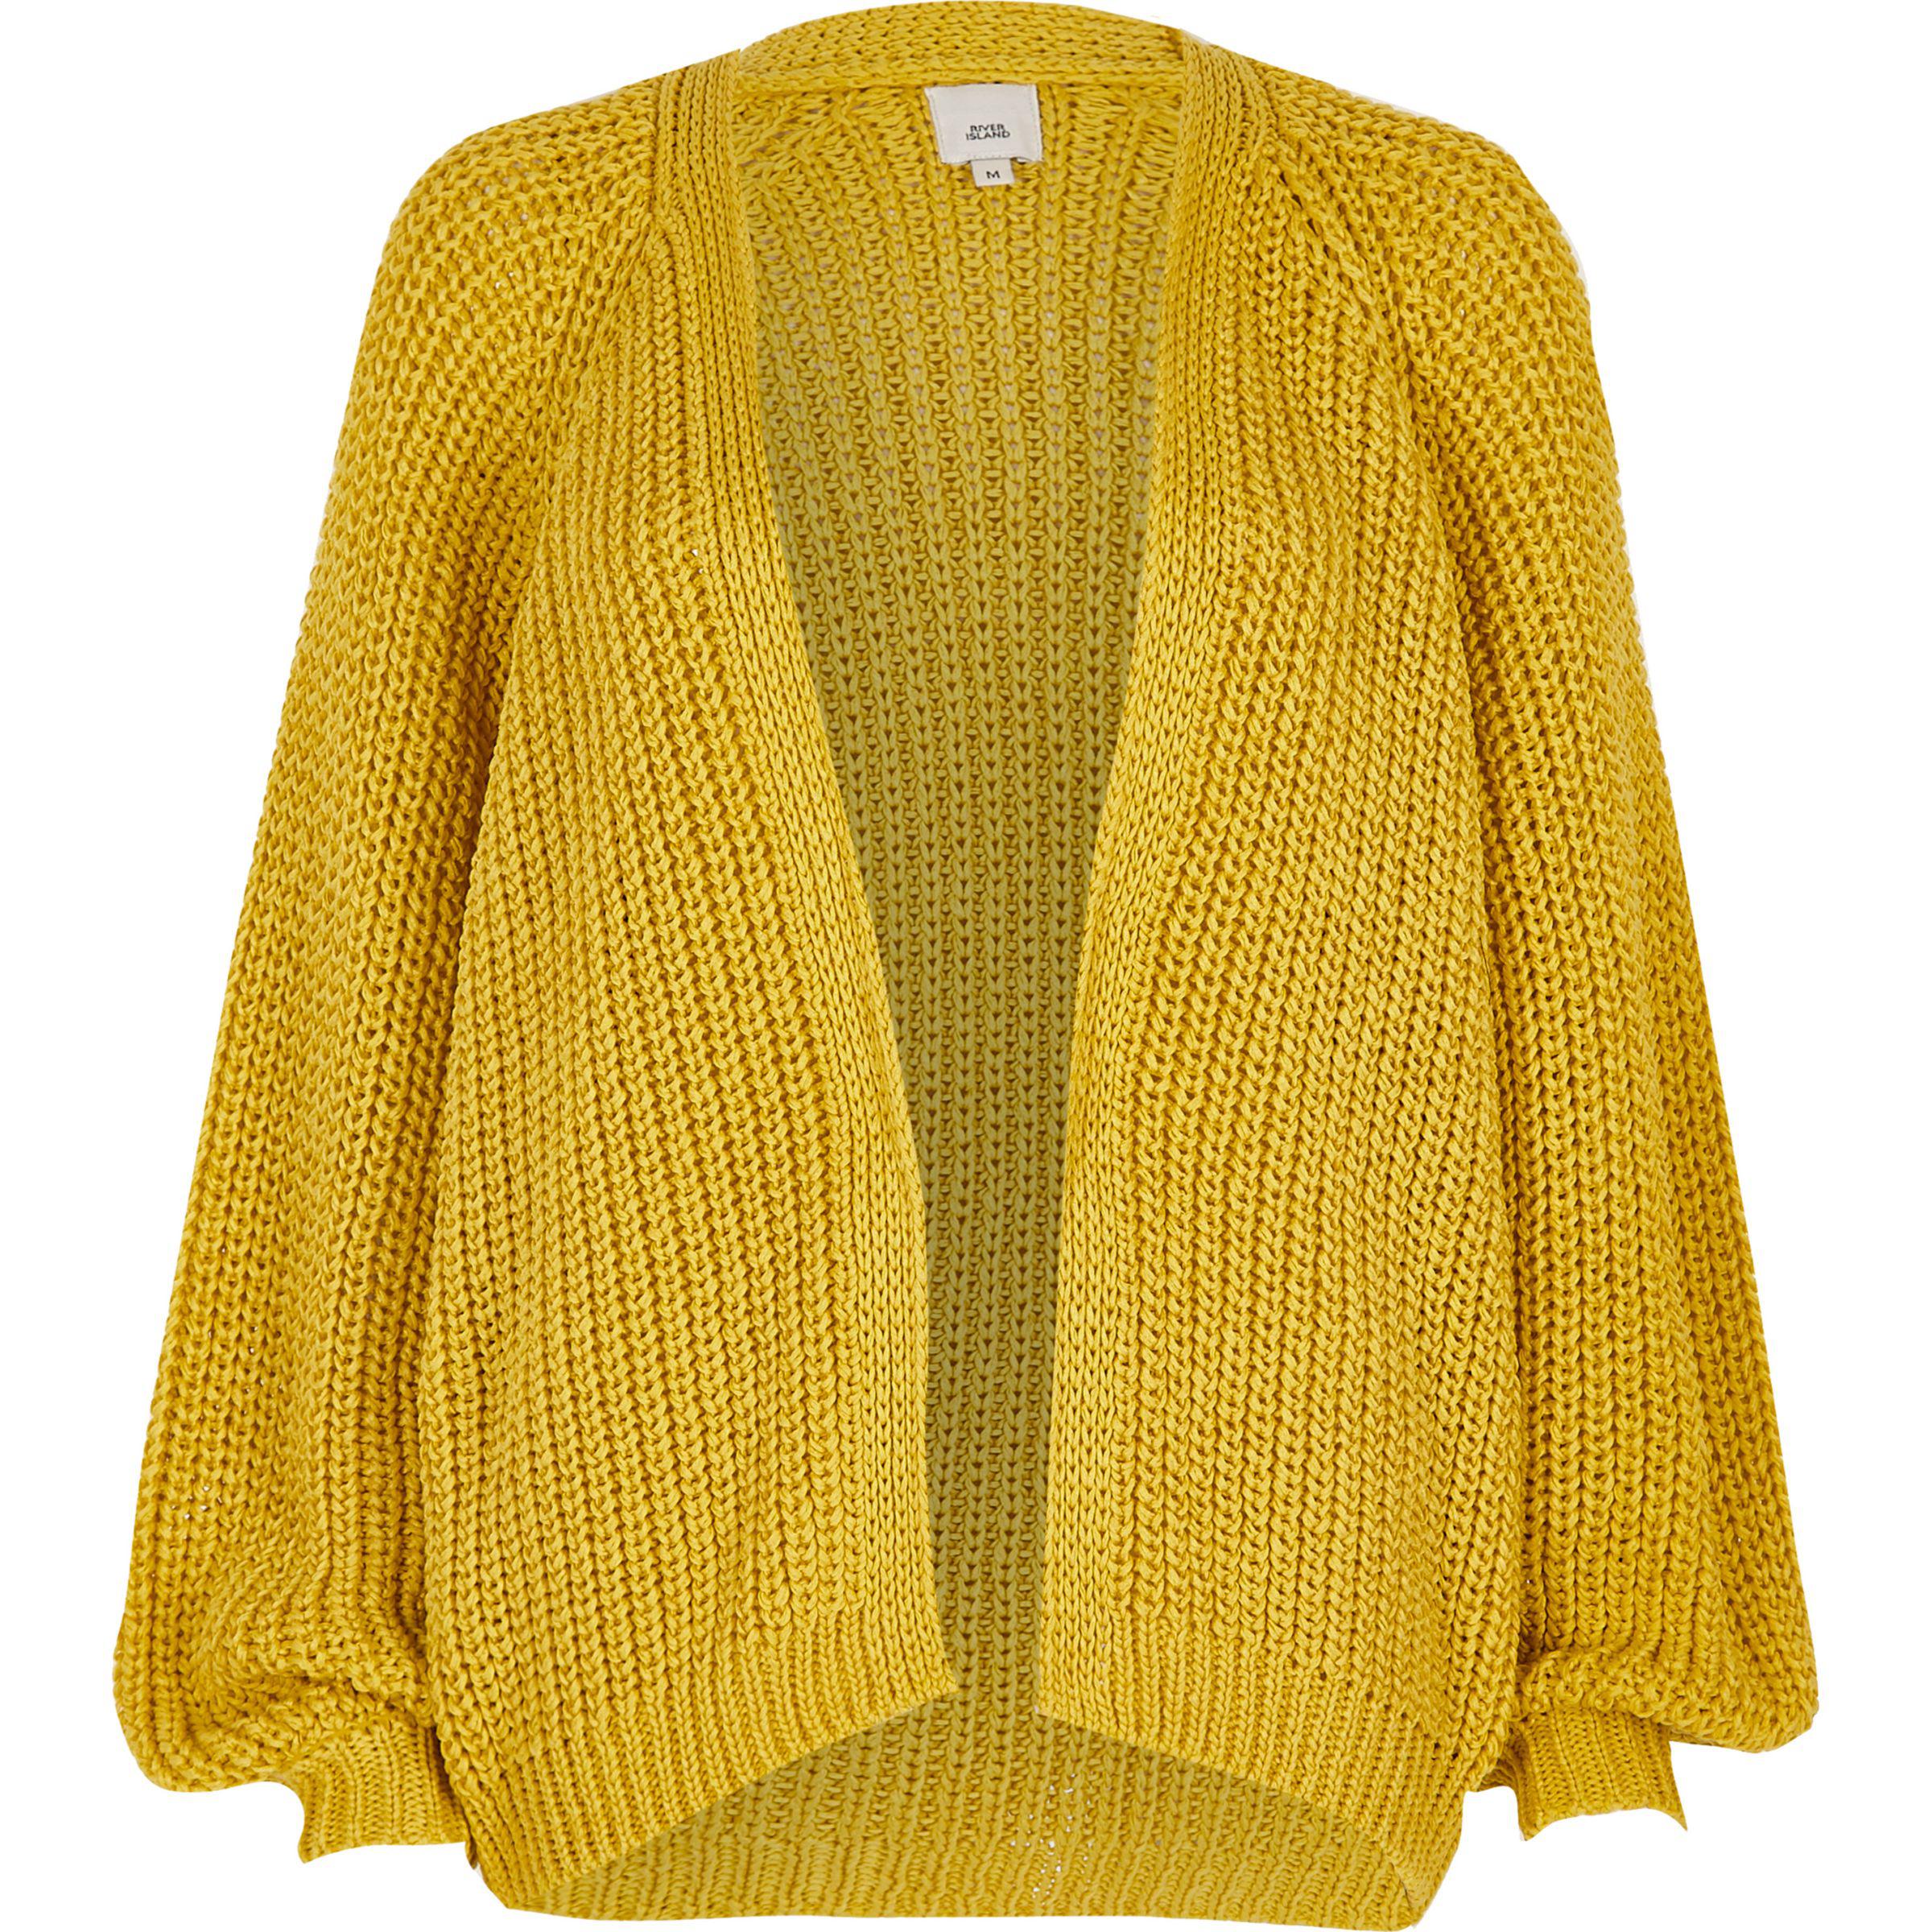 River Island Synthetic Chunky Tape Knit Cardigan in Yellow - Lyst